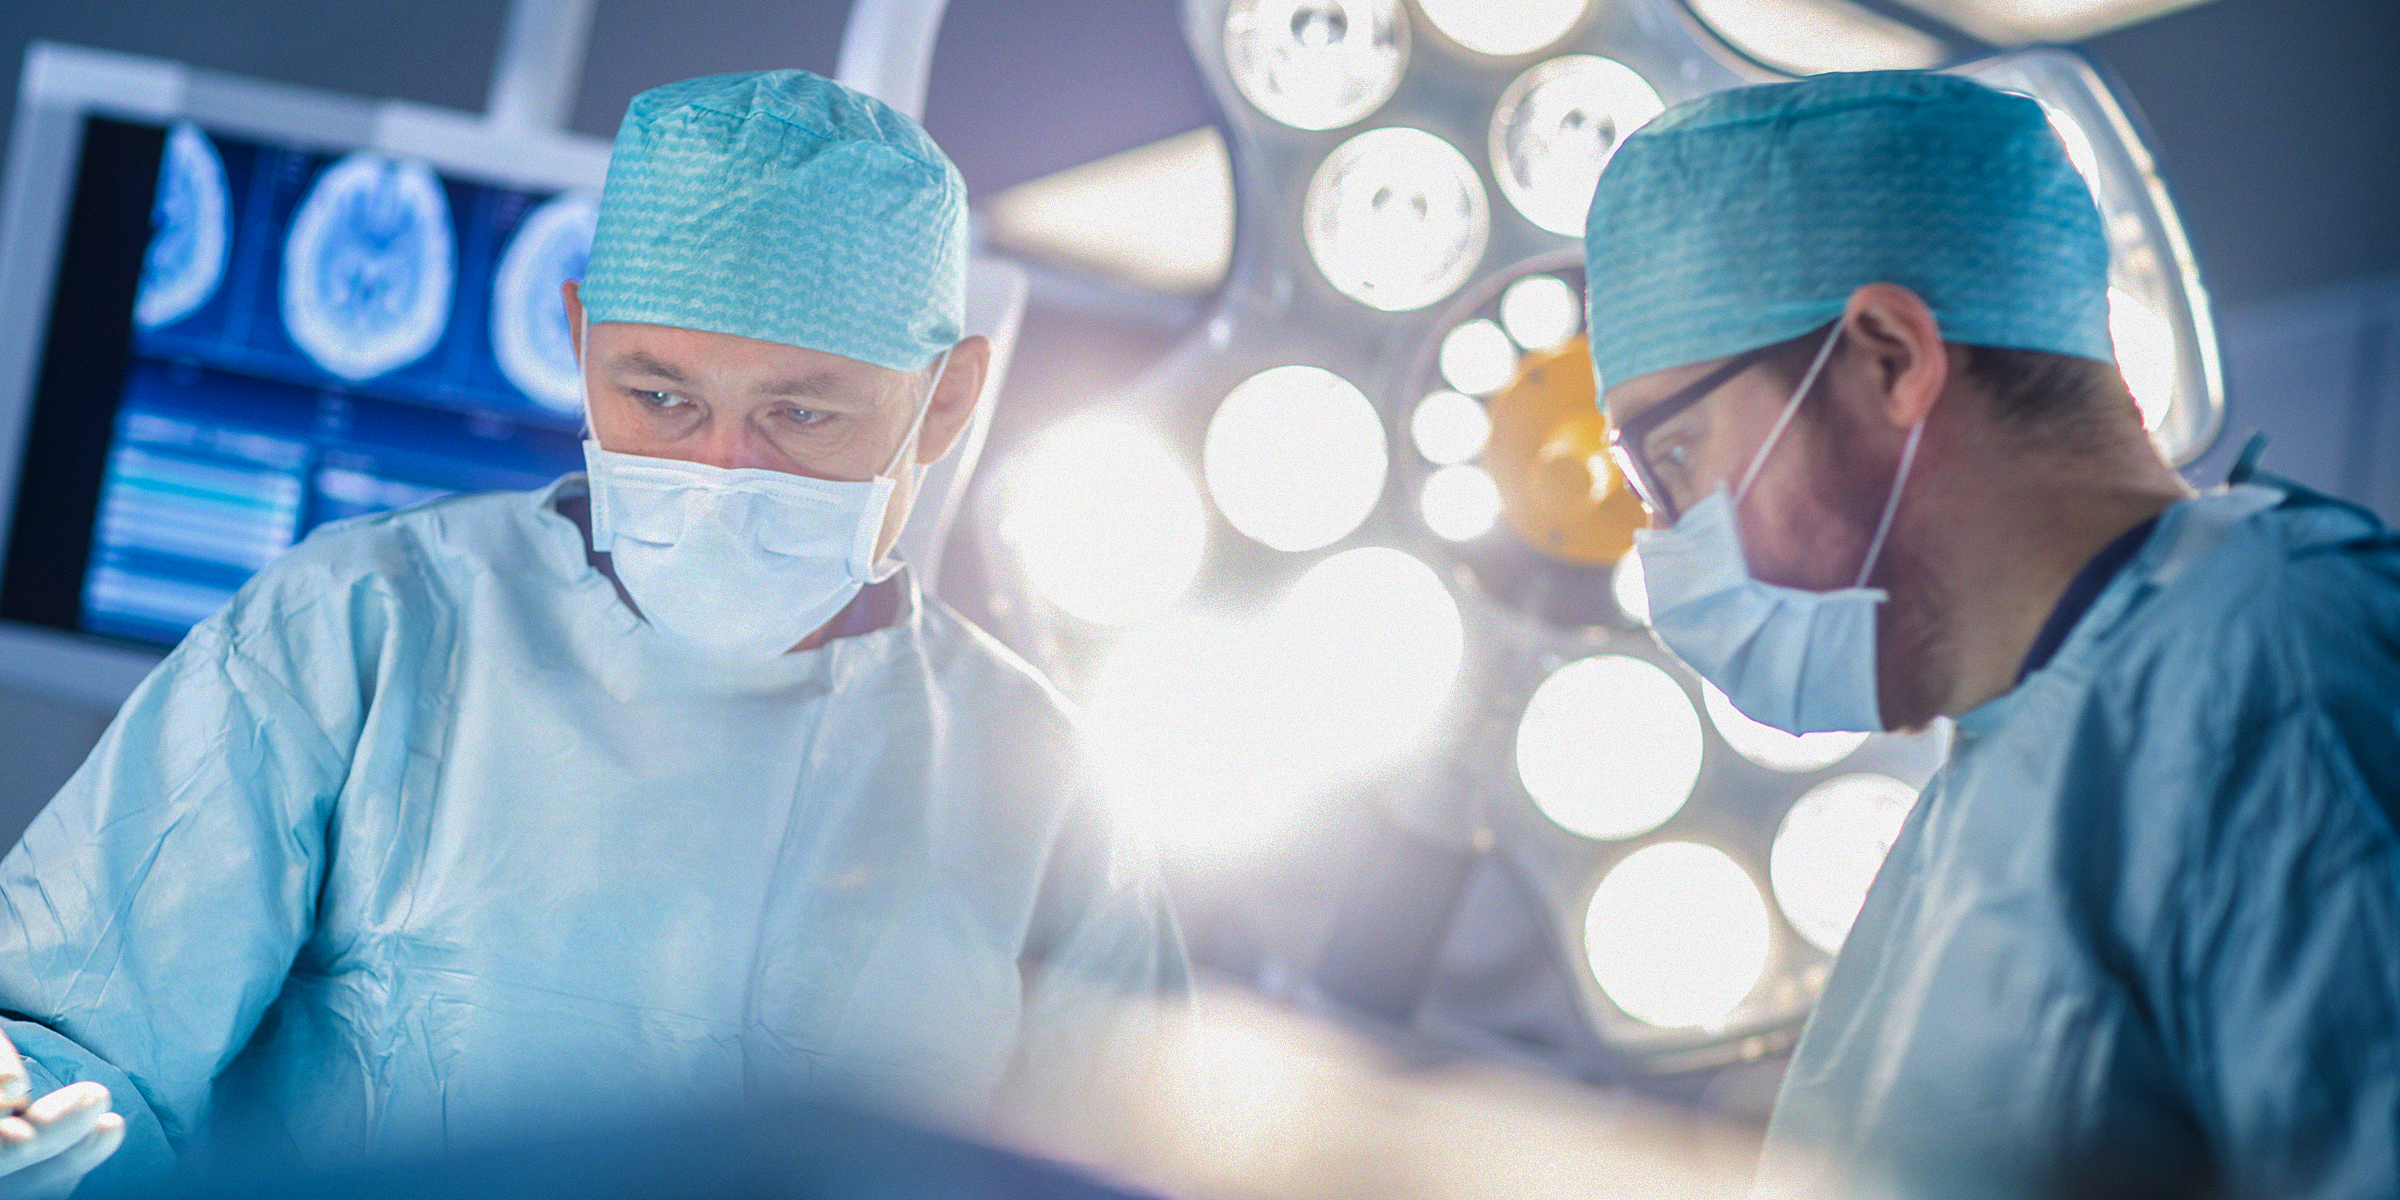 Doctors in an operating theatre | Source: Shutterstock